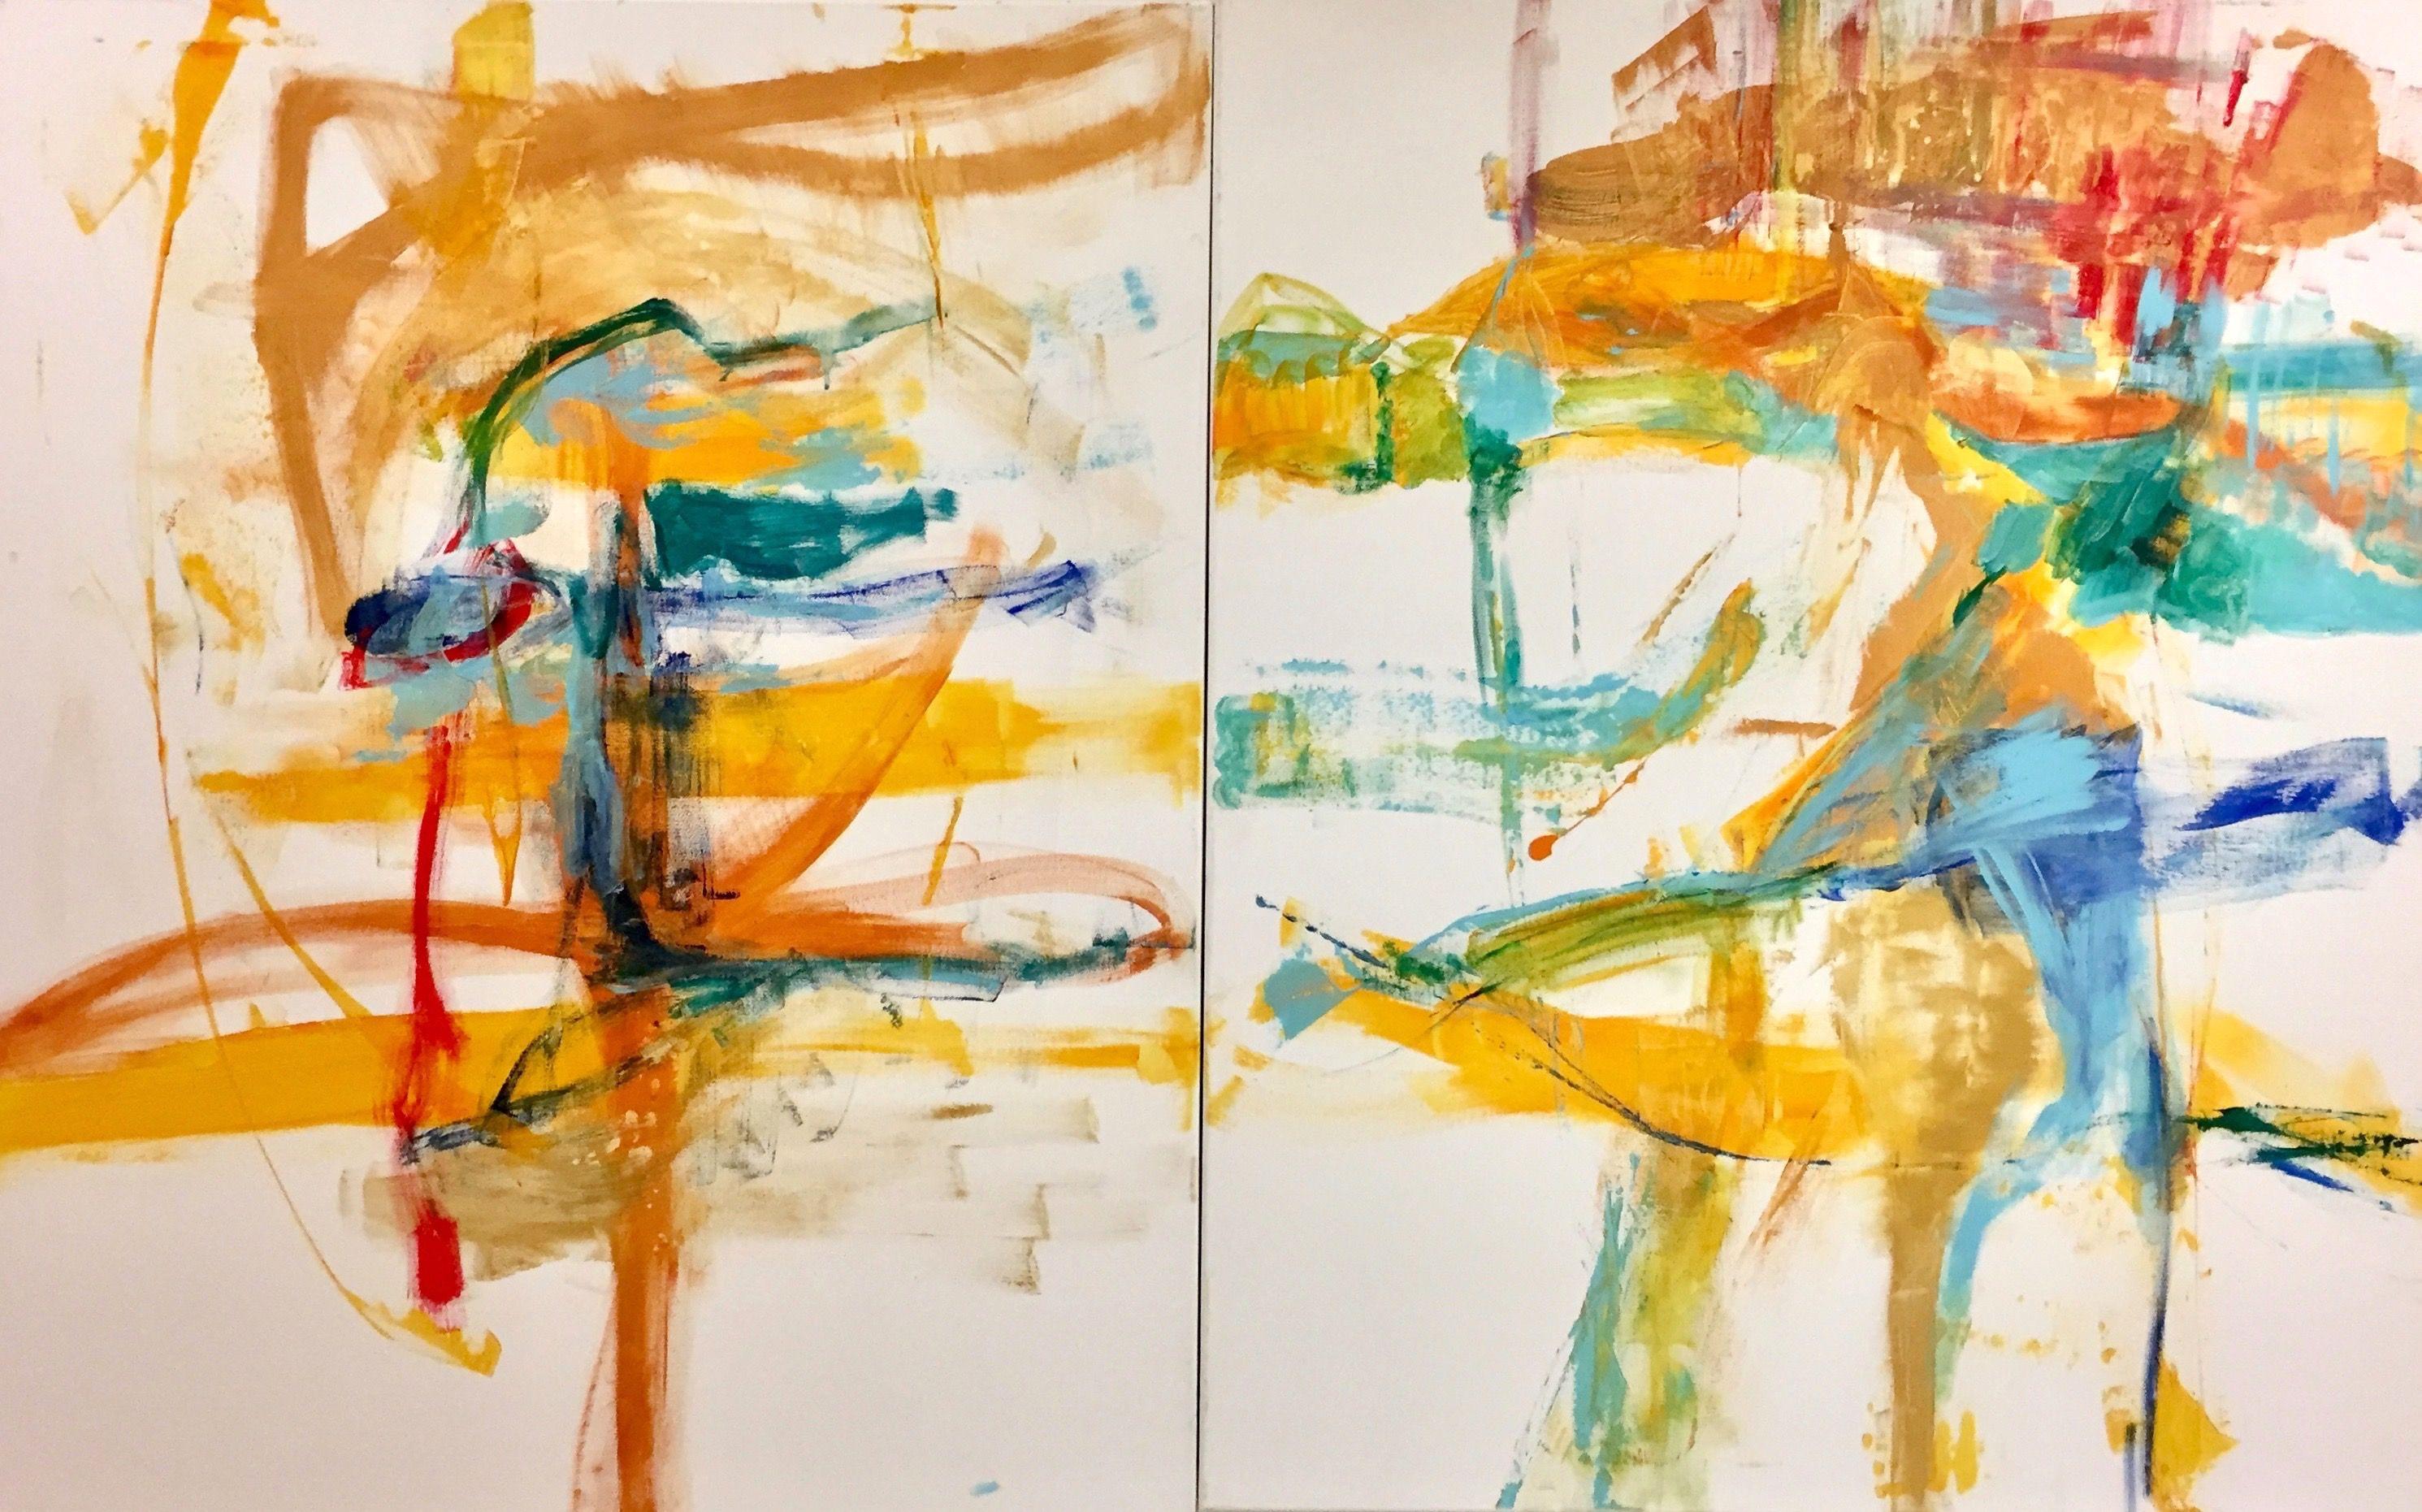 Life, love, happiness, peace, dance - all of this expressed in the yellow and turquoise in this artwork. It evokes the pleasure of a happy and relaxing weekend day!  The paintings will bring sunshine into your rooms!!!    The artwork consists of two